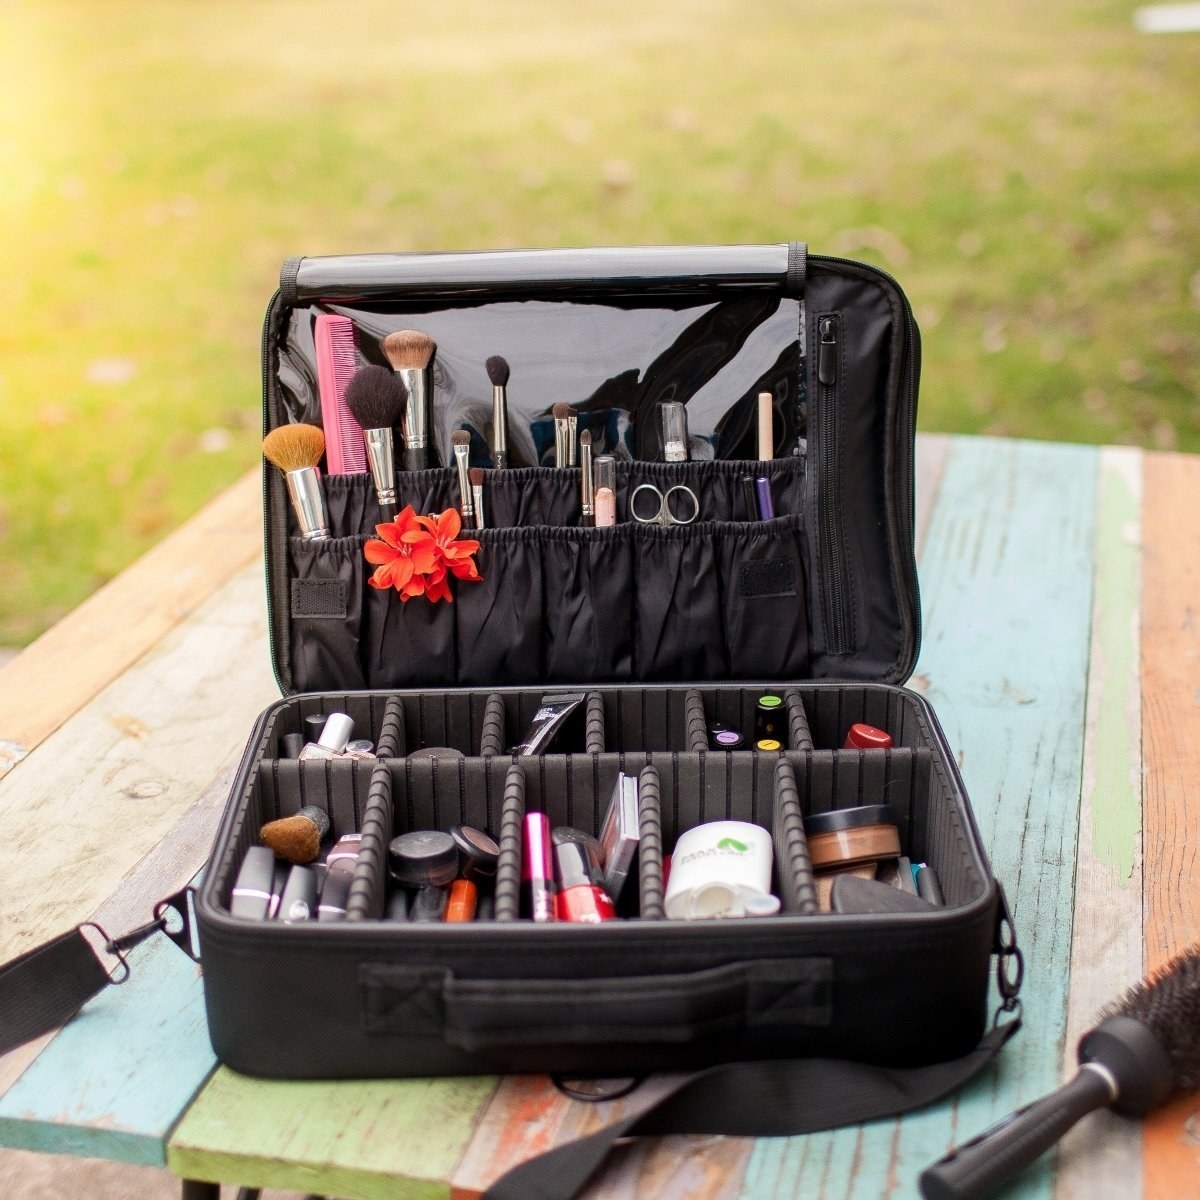 Download 19 Of The Best Makeup And Cosmetic Bags You Can Get On Amazon